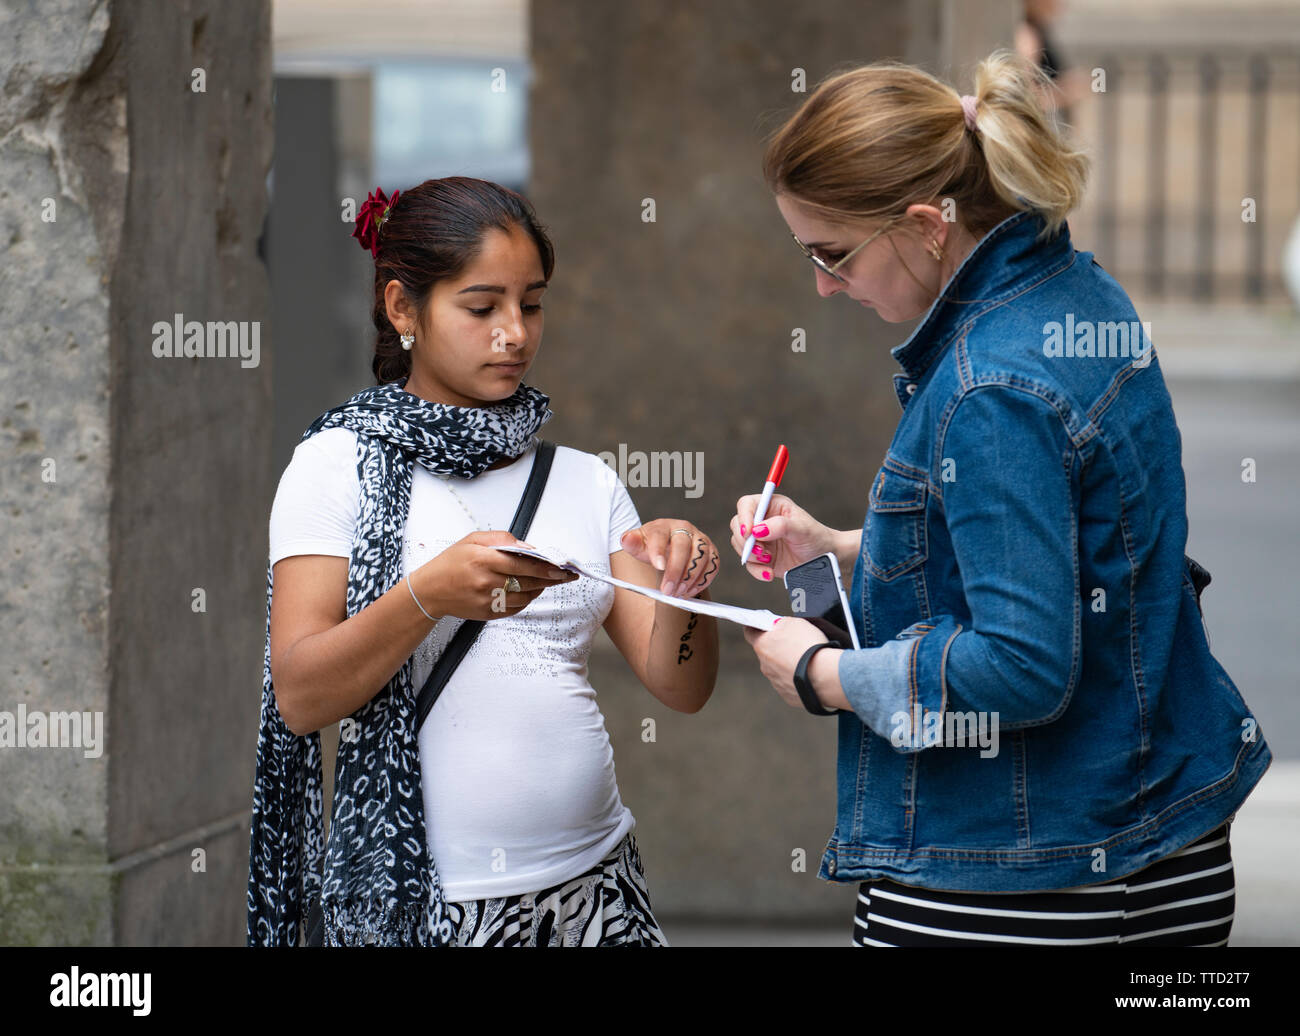 Tourist signing fake petition before handing over money donation in common scam operated by gangs of women in Berlin, Germany Stock Photo